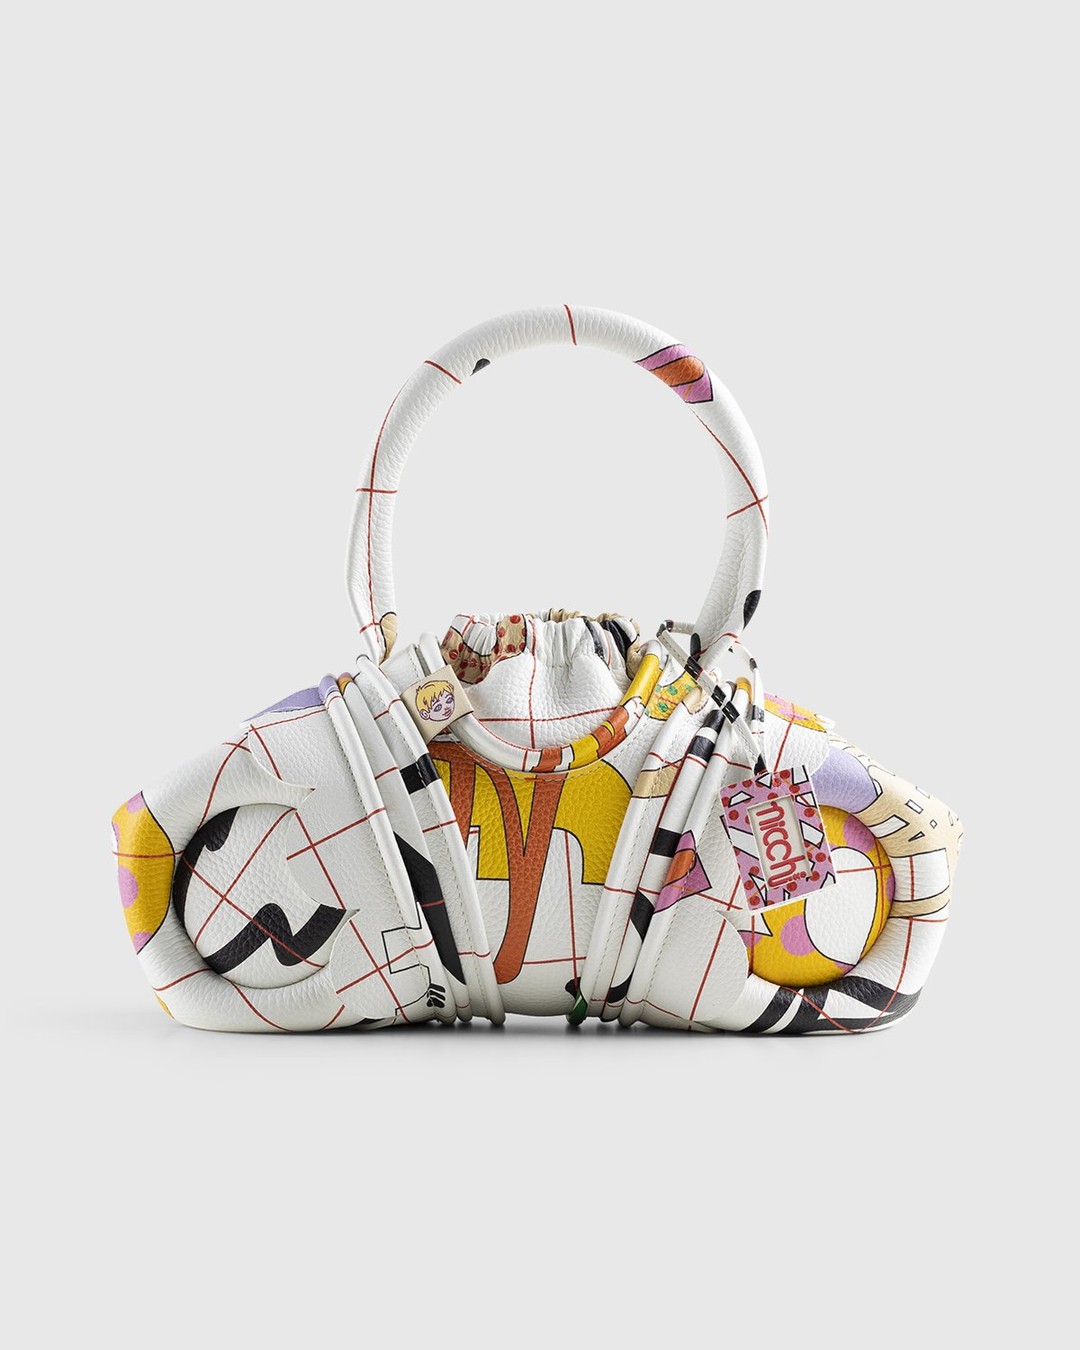 Nora Turato x Ecco Leather x Nicchi x Highsnobiety – Boomblaster Infinity Pool Dragon Toes Bag - Shoulder Bags - White - Image 1